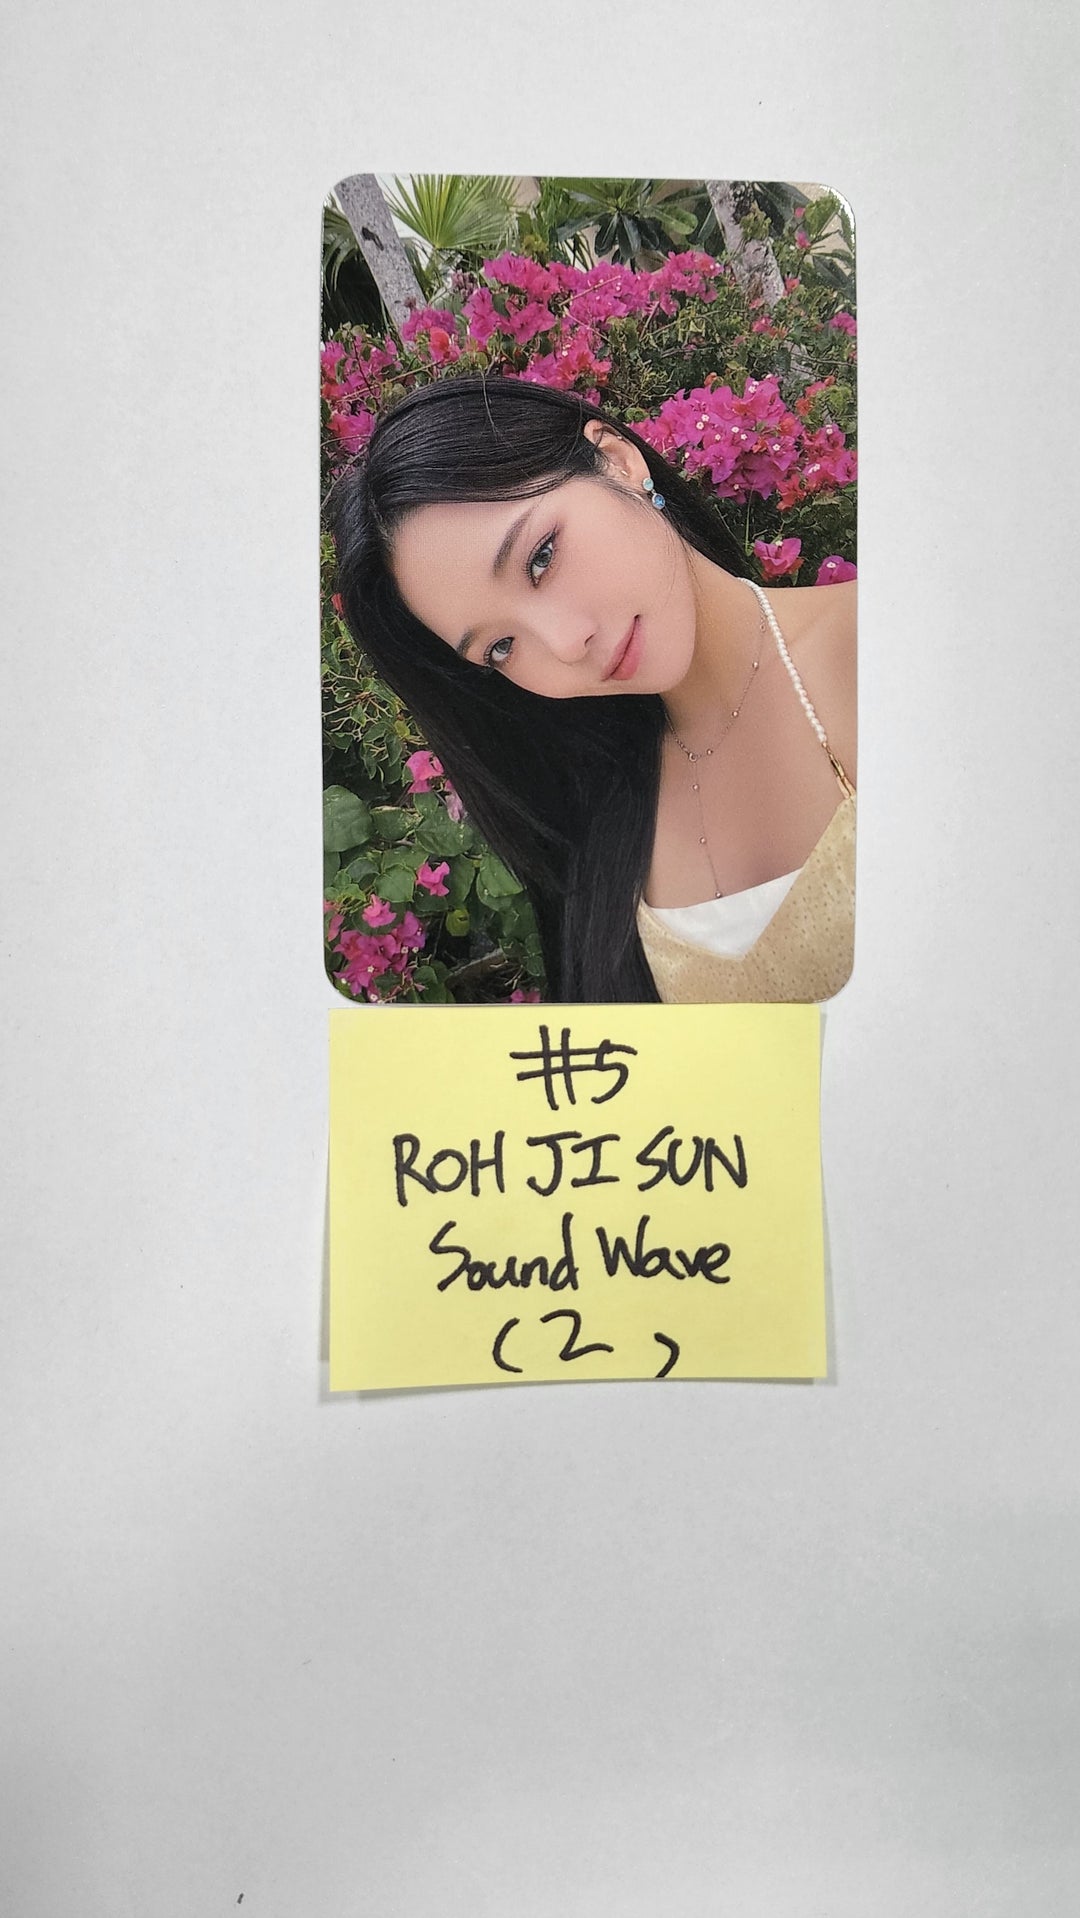 Fromis_9 "from our Memento Box" - Soundwave Fansign Event Photocard